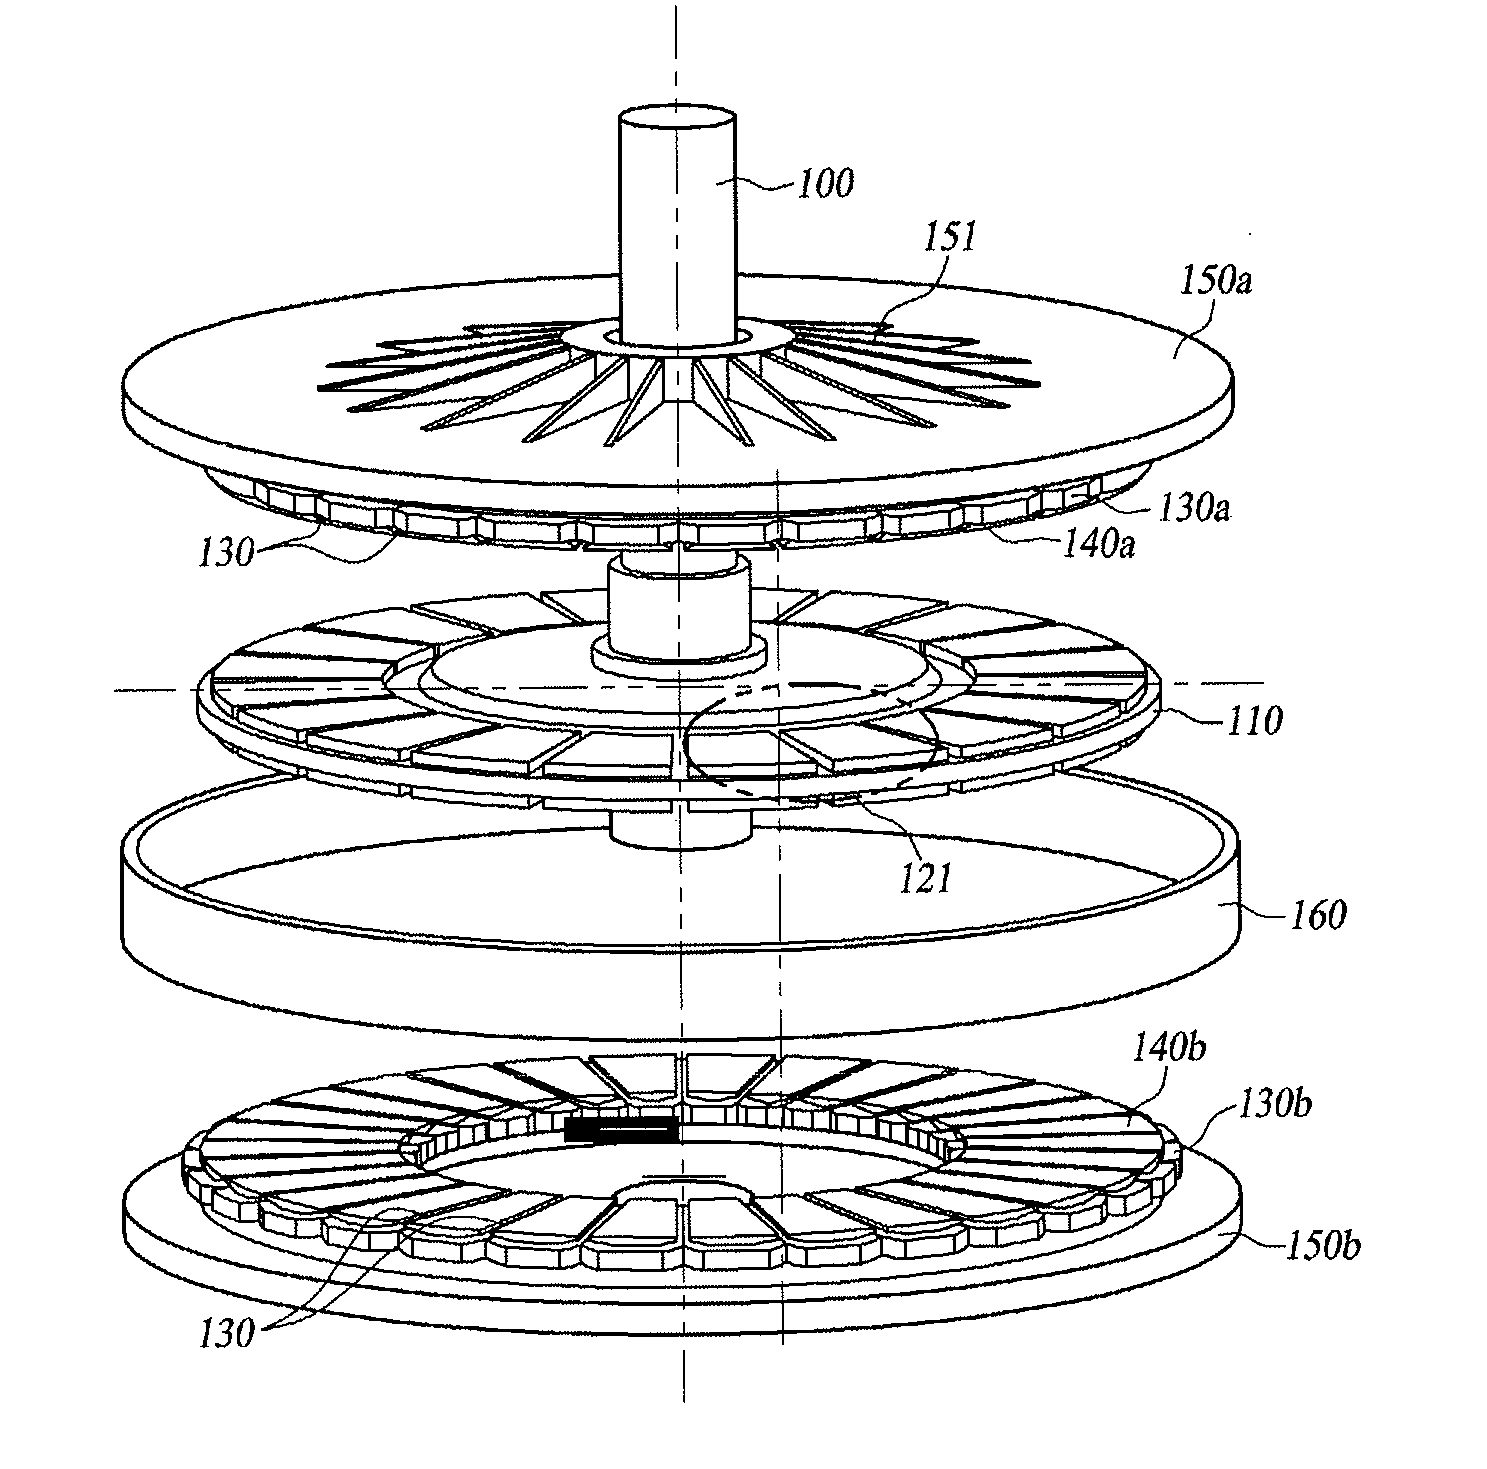 Axial flux permanent magnet synchronous generator and motor